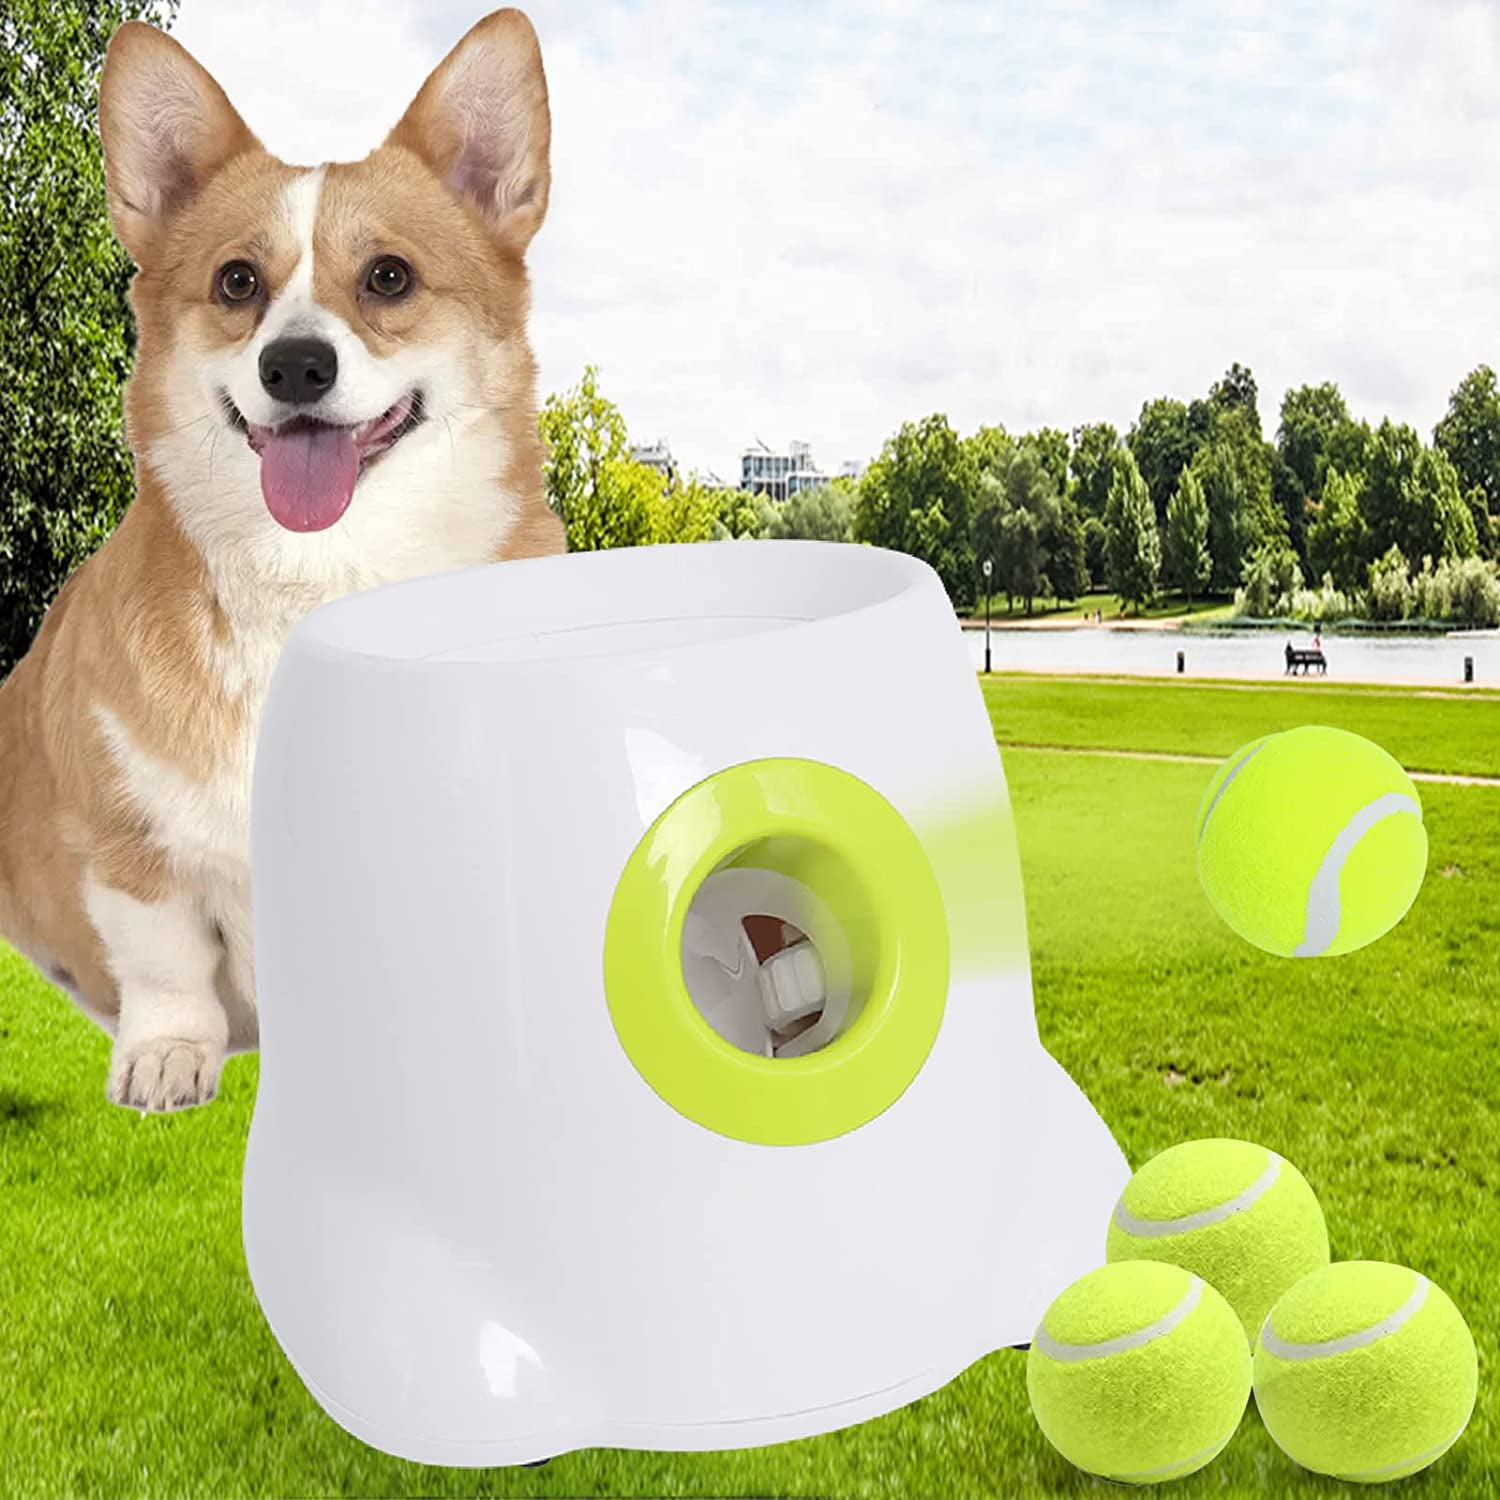 SKIPDAWG Interactive Tennis Balls for Dogs, Squeaky Dog Toy Balls Launcher  Compatible, High Bouncy Dog Tennis Balls 2.5 Inches for Exercise, Safe